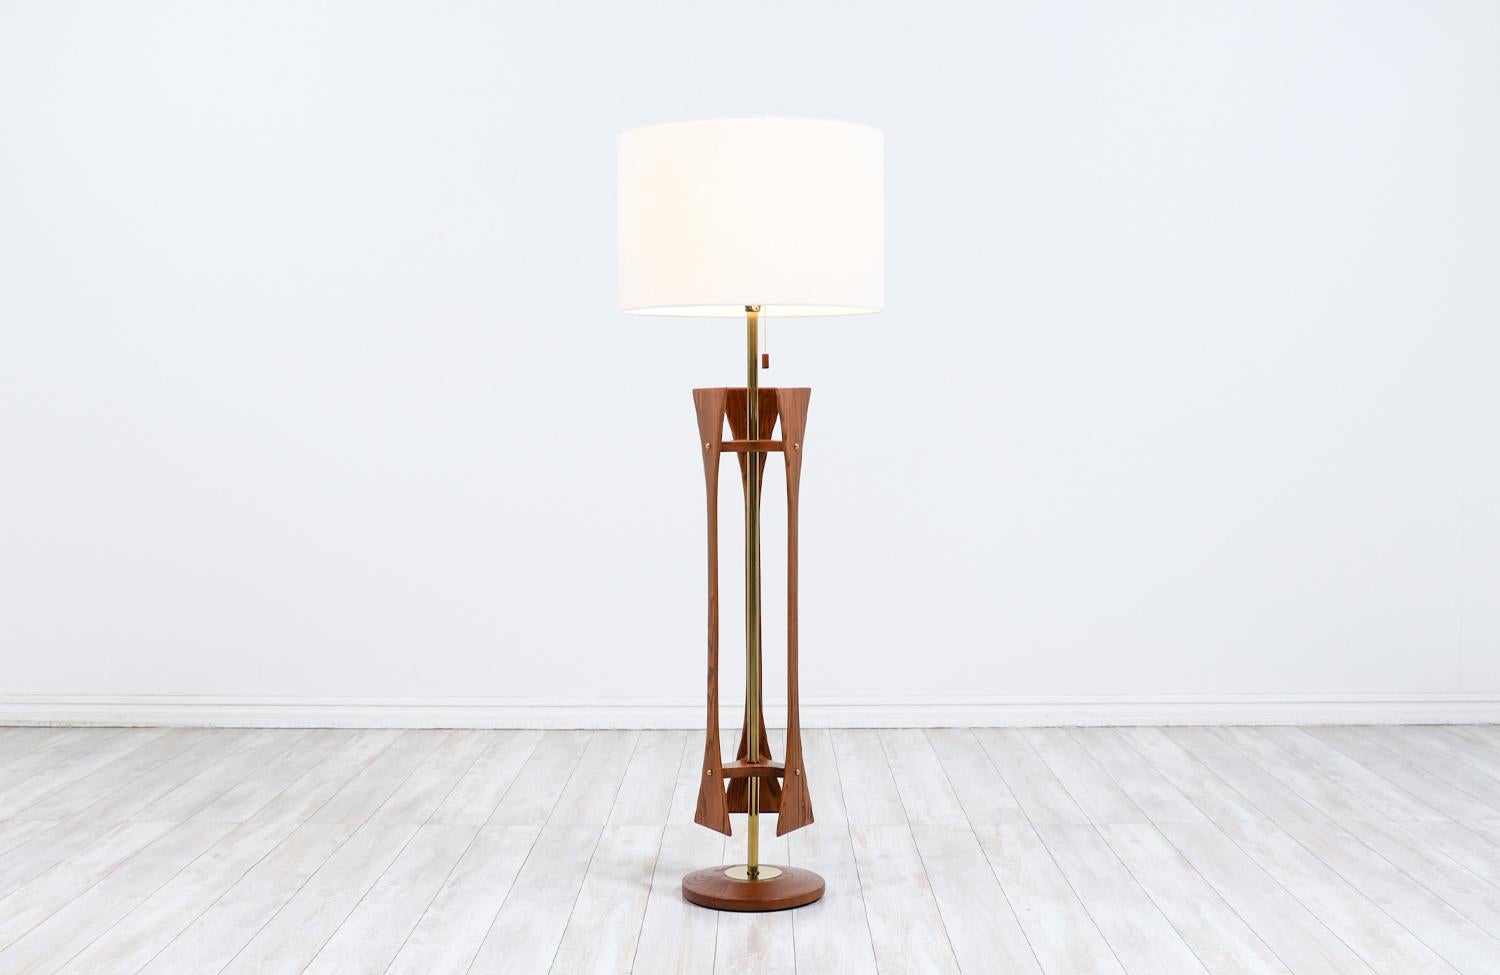 Polished Mid-Century Modern Walnut Sculpted Floor Lamp with Brass Accents